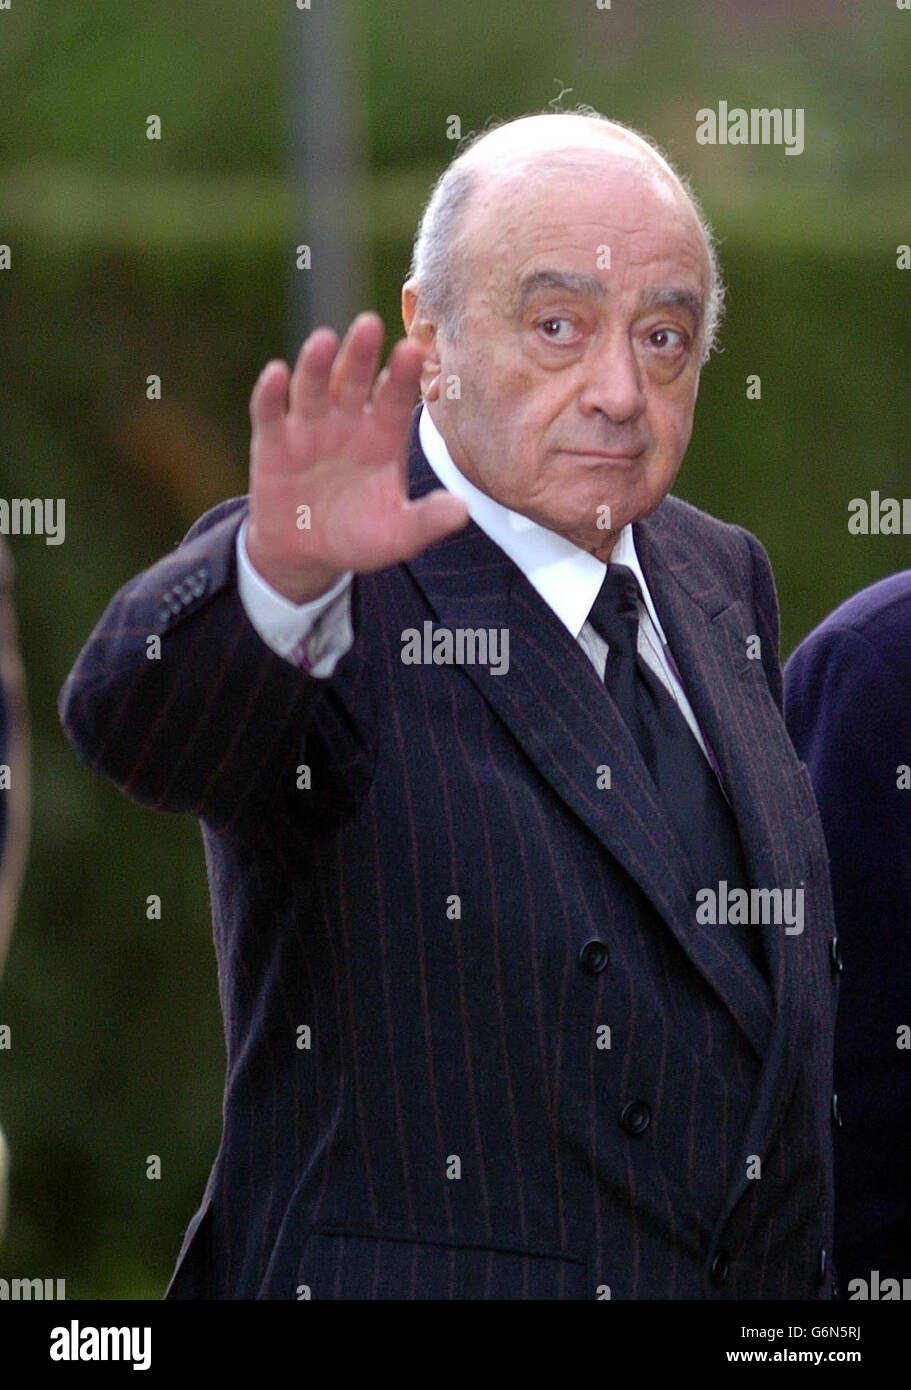 Mohamed al Fayed arrives at the inquest into the death of his son, Dodi Fayed, at Wray Park in Reigate. It followed the opening of an inquest earlier today at the Queen Elizabeth II conference centre in Westminster, London, into the death of Diana, Princess of Wales. Diana, 36, and her playboy boyfriend 42-year-old Ehmad Al Fayed, nicknamed Dodi, were killed with chauffeur Henri Paul when their Mercedes crashed in the Pont d'Alma tunnel in Paris on August 31 1997. Stock Photo